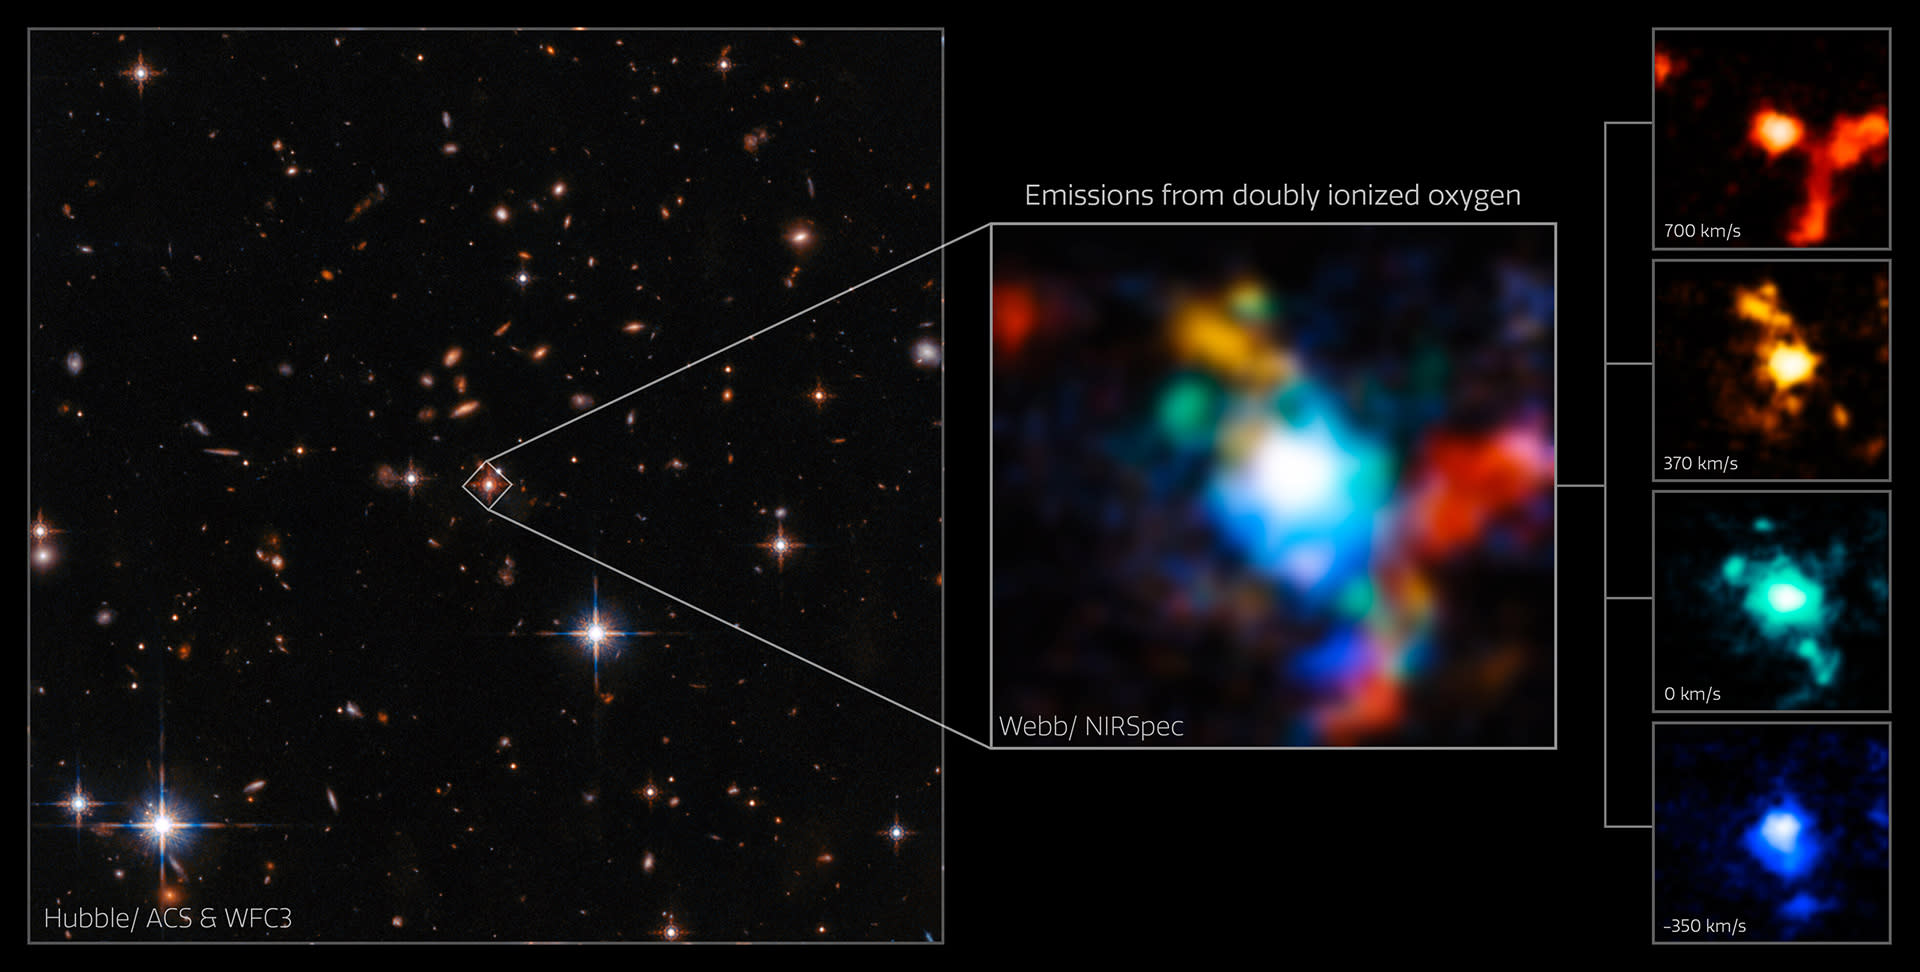 James Webb Space Telescope image of Galaxy cluster 'knot' in the early universe